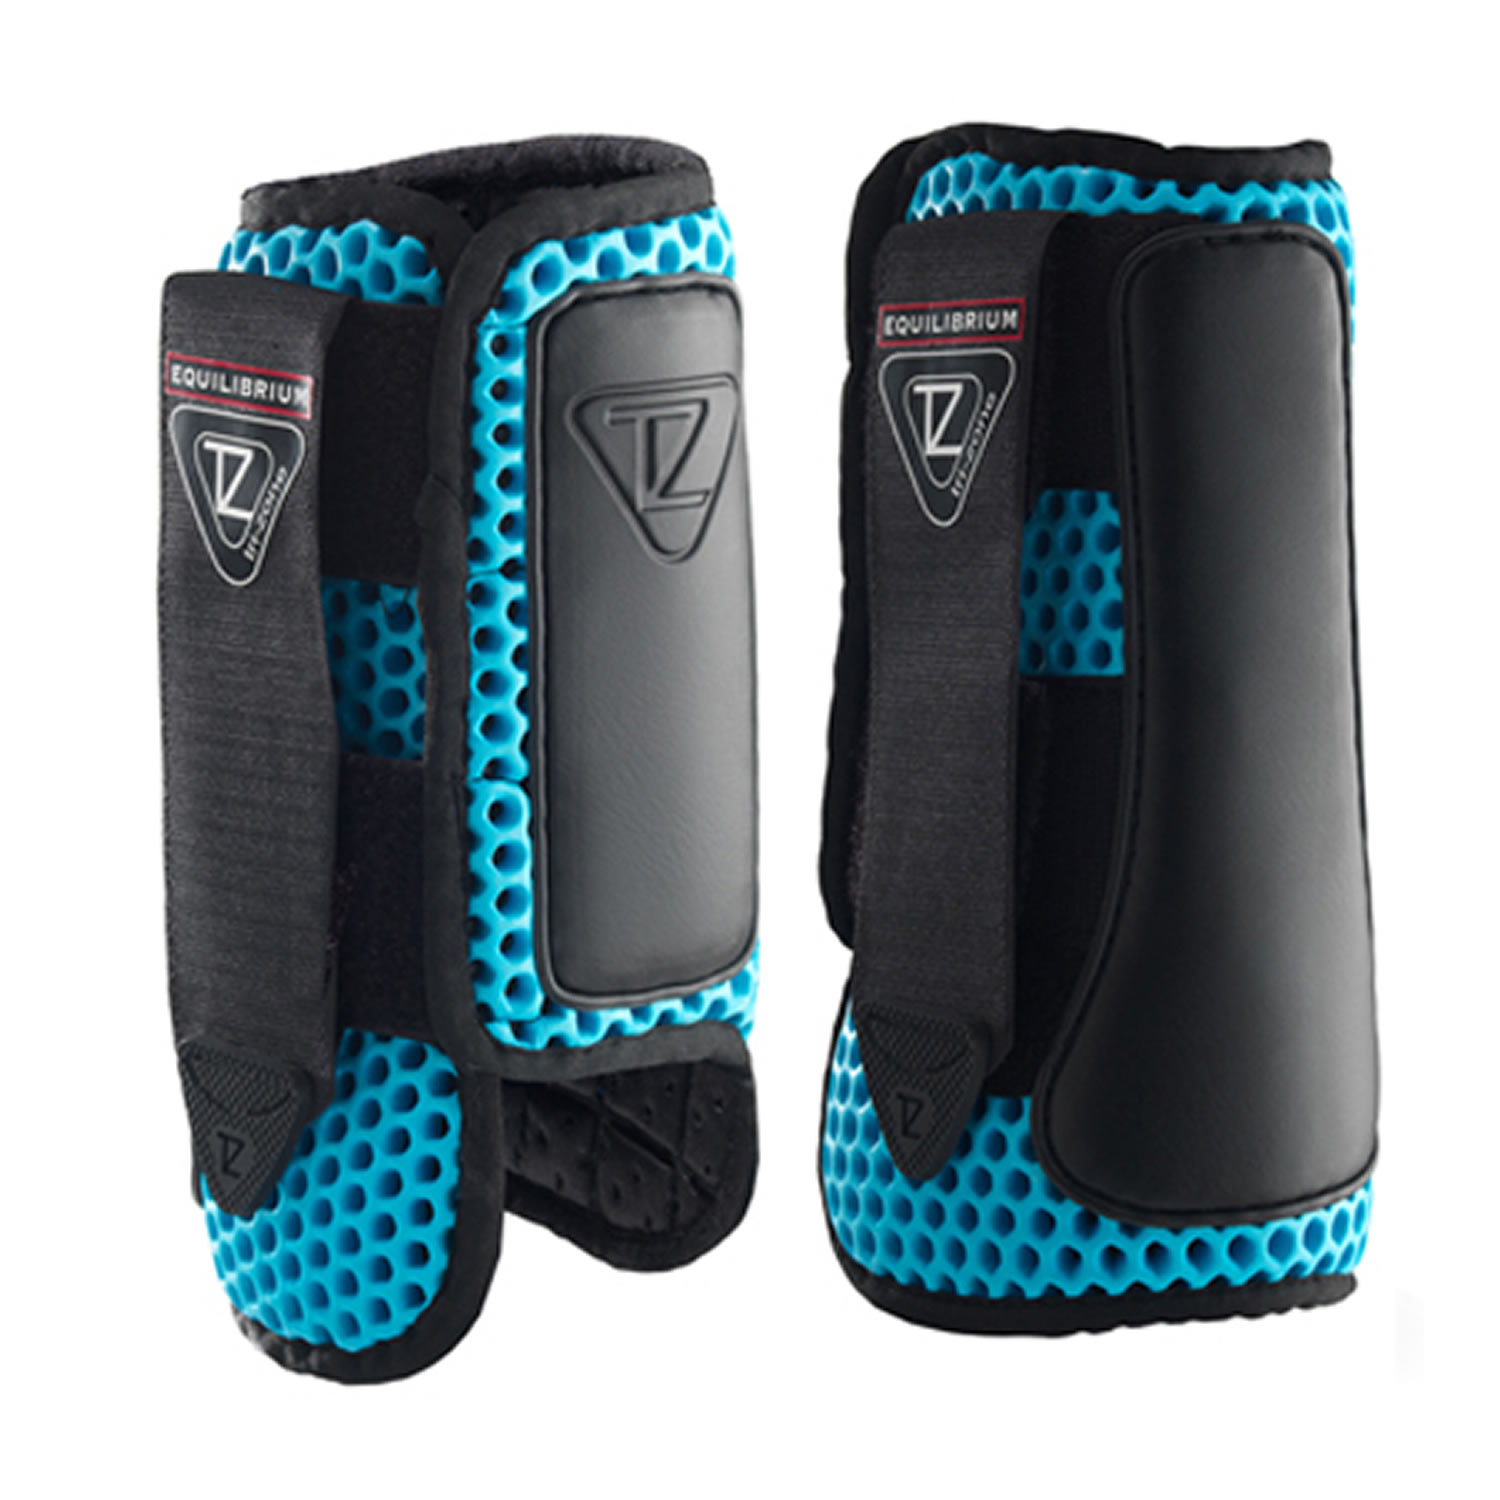 EQUILIBRIUM TRI-ZONE IMPACT SPORTS BOOTS BLUE FRONT SMALL FRONT SMALL FRONT